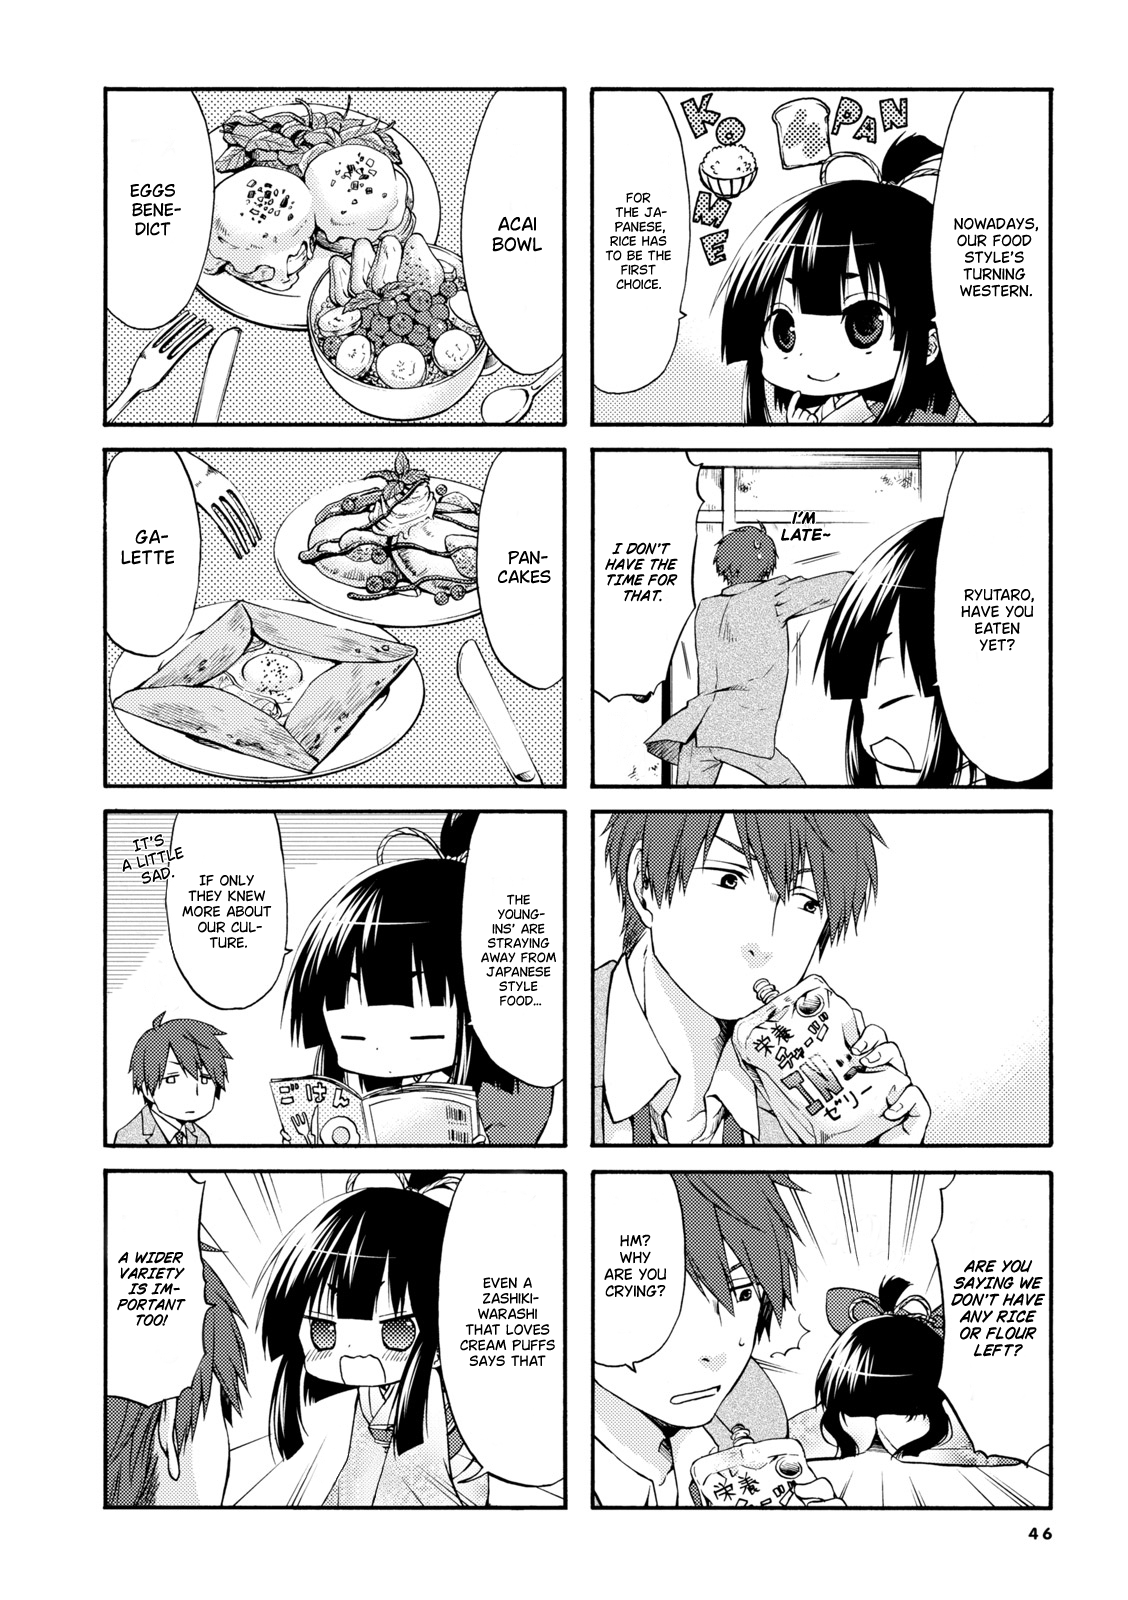 A Zashikiwarashi Lives In That Apartment Vol.1 Chapter 6 - Picture 2